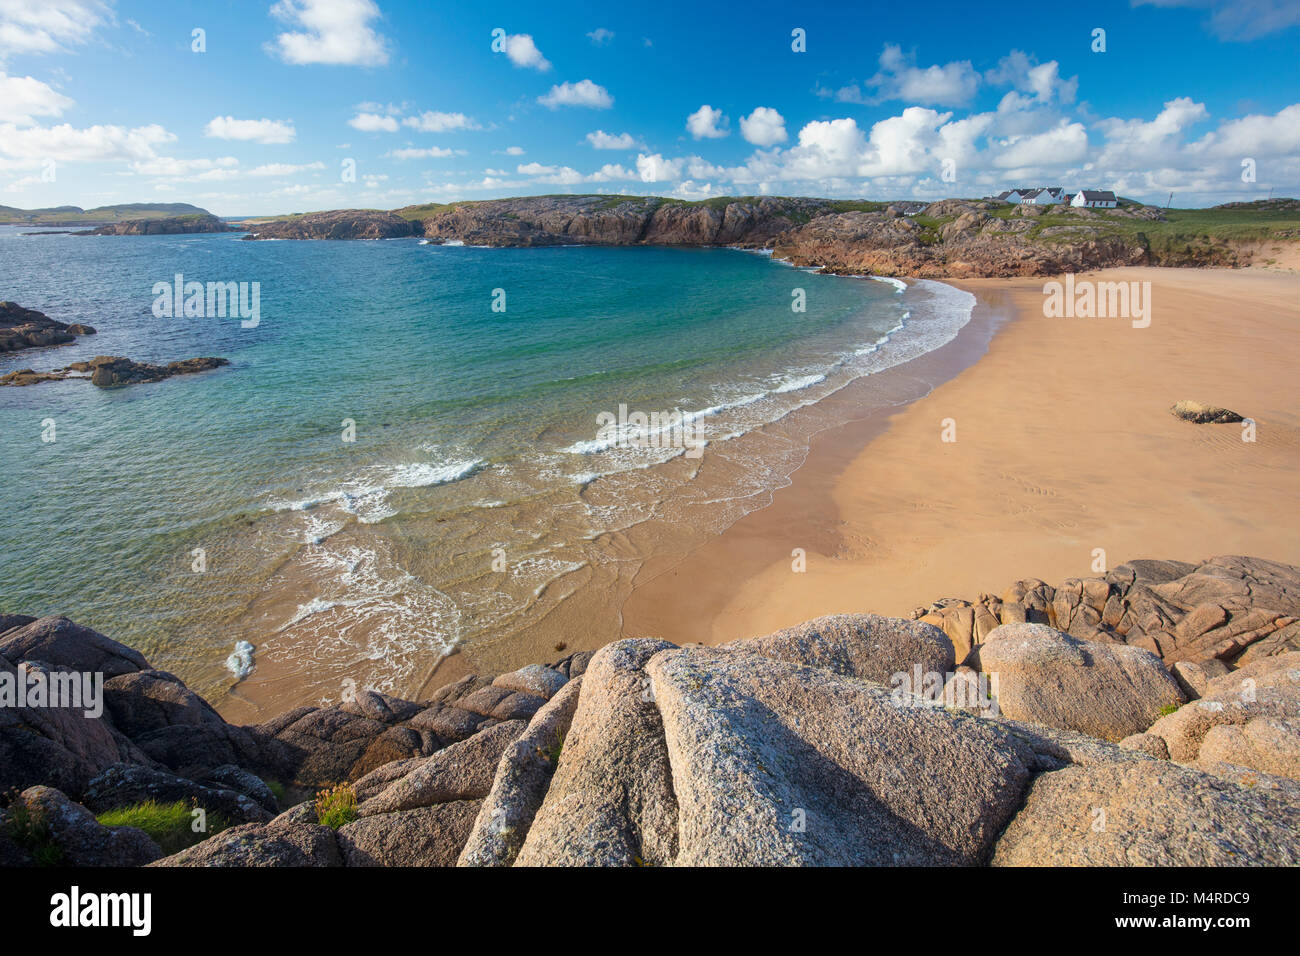 Sandbucht in Traderg Bay, Cruit Island, das Rosses, County Donegal, Irland. Stockfoto